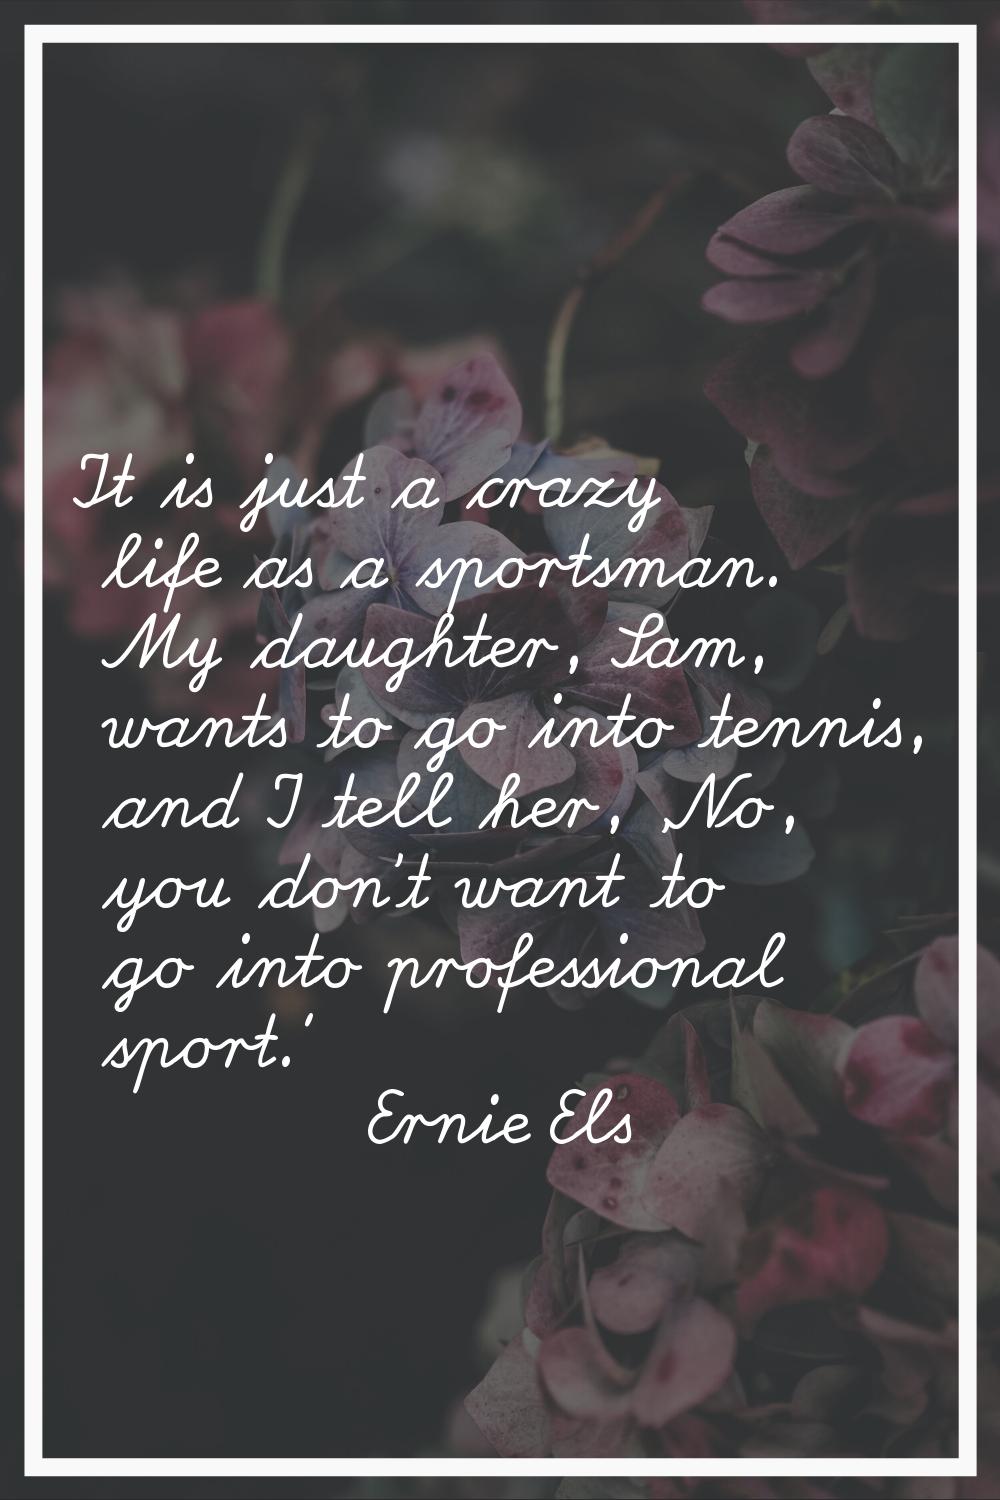 It is just a crazy life as a sportsman. My daughter, Sam, wants to go into tennis, and I tell her, 